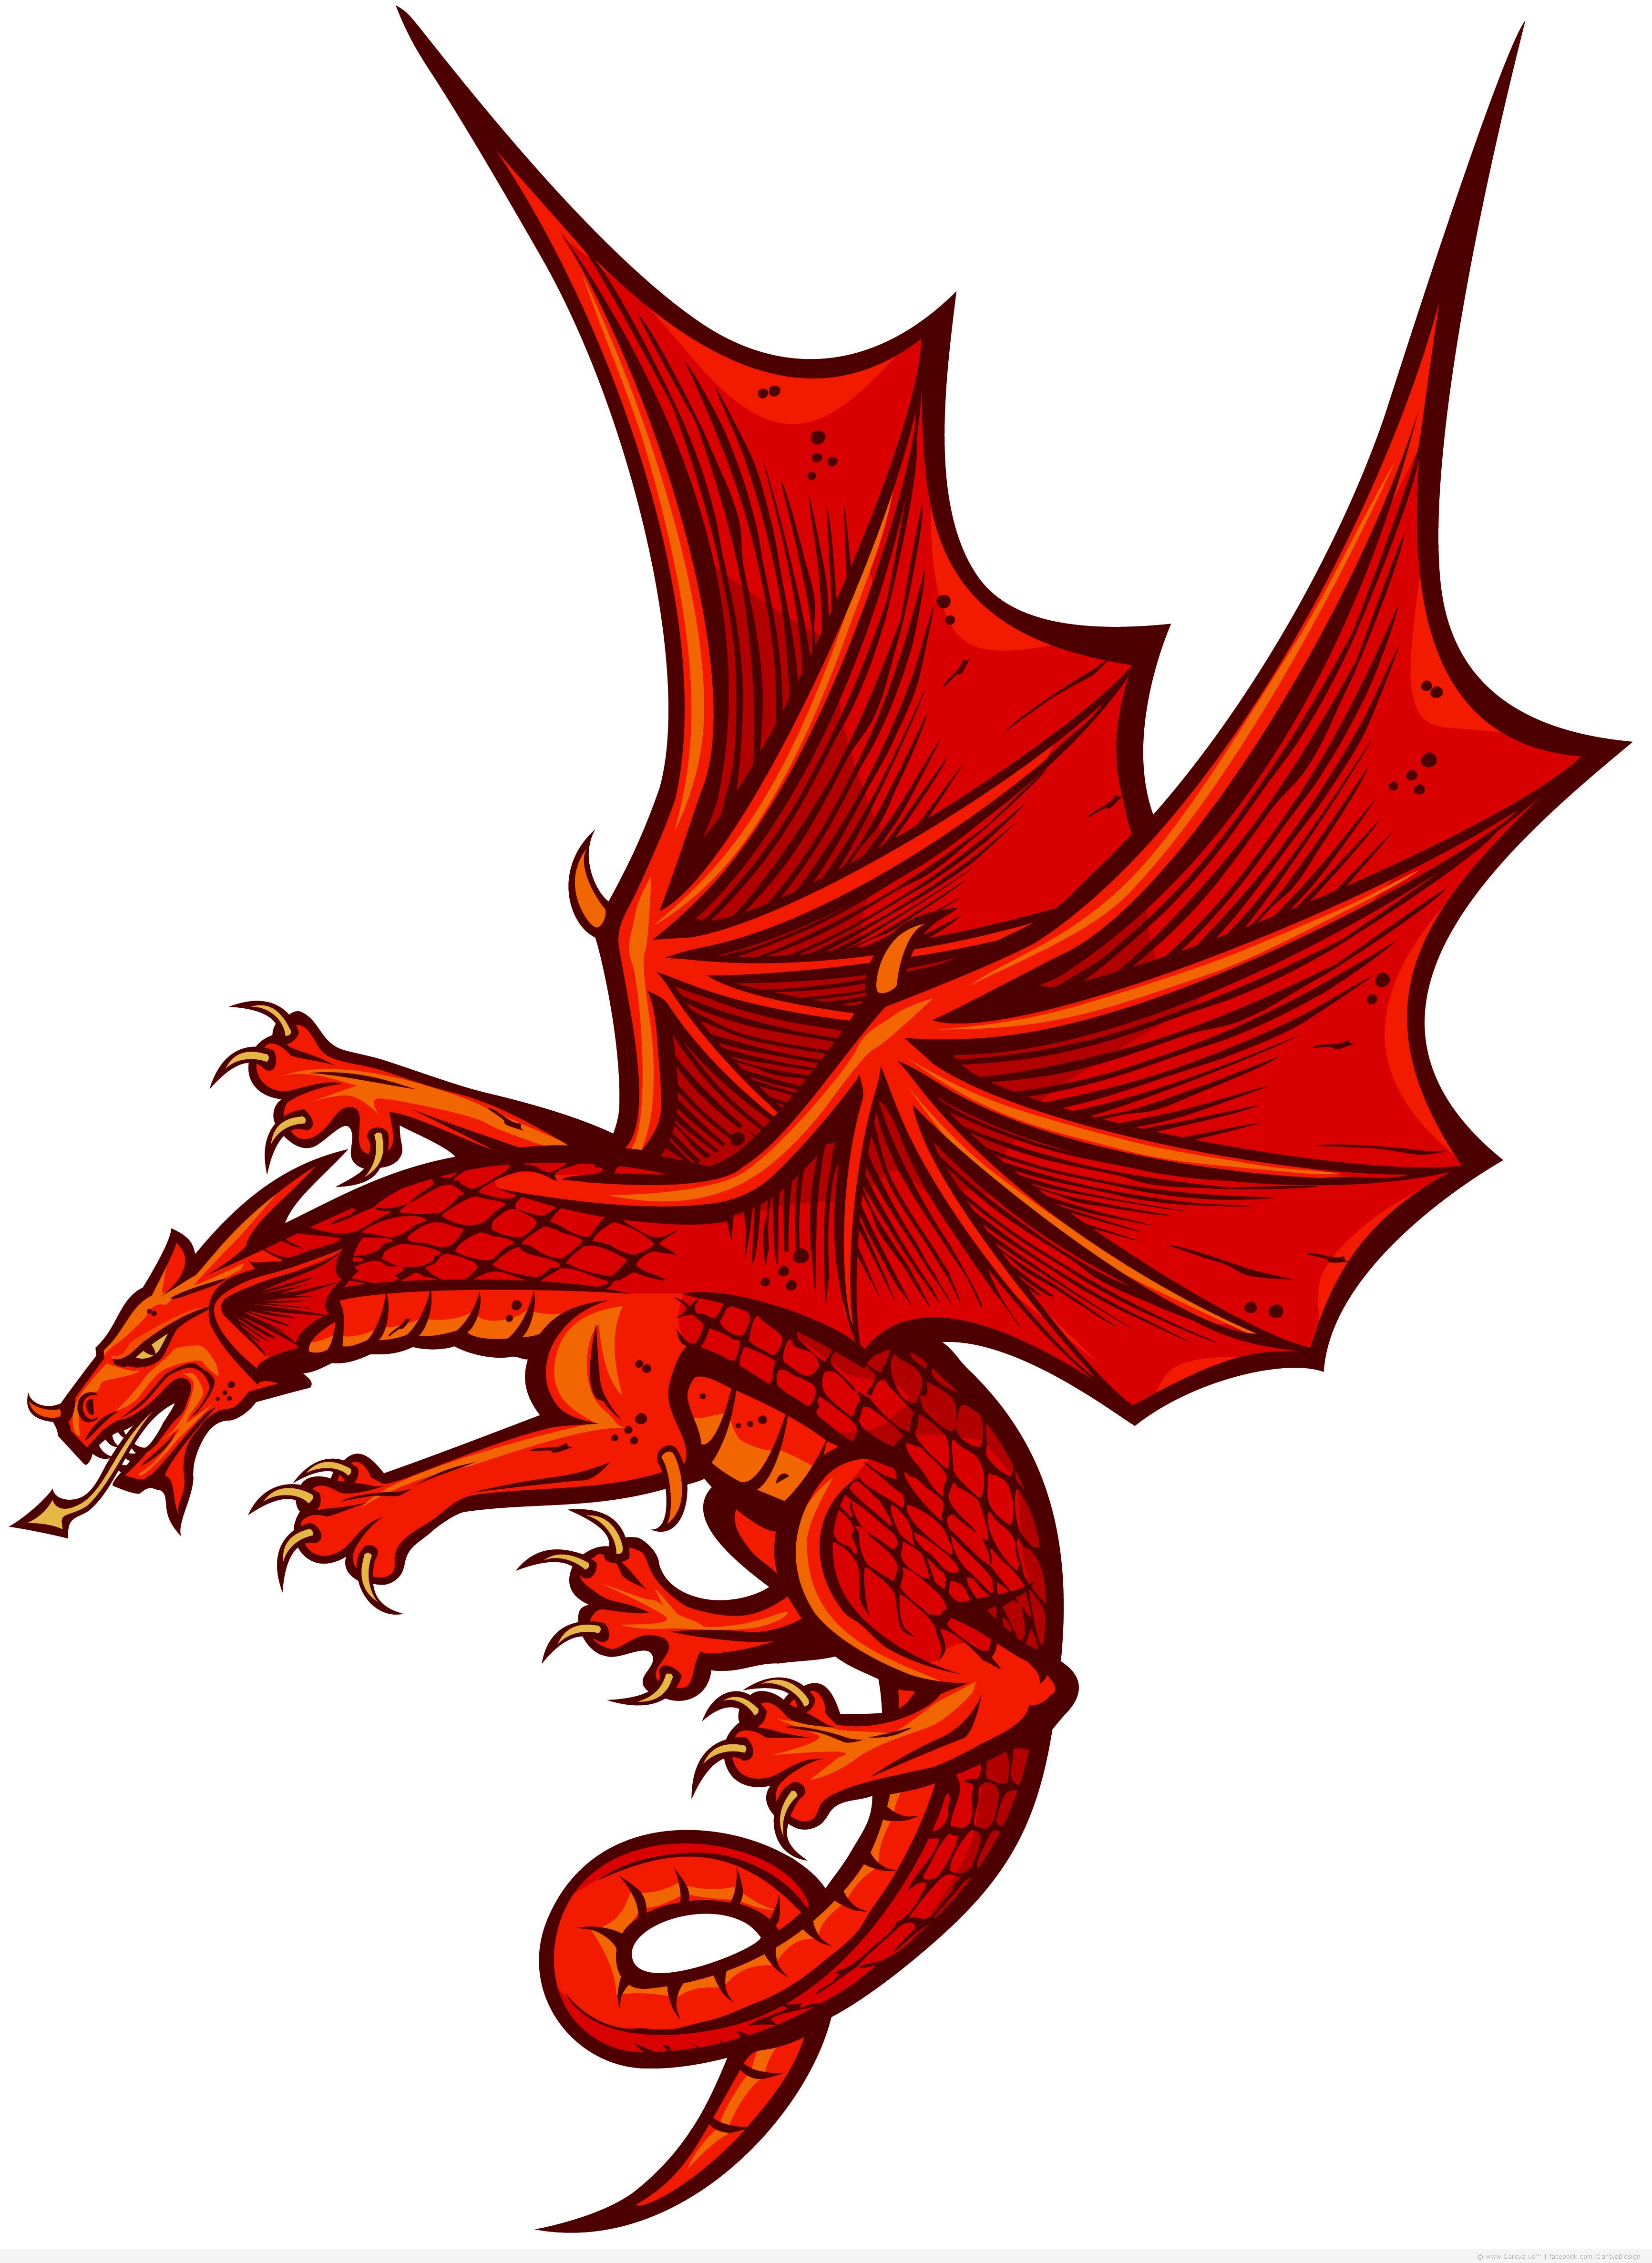 16 Cartoon Red Dragons Vector Images